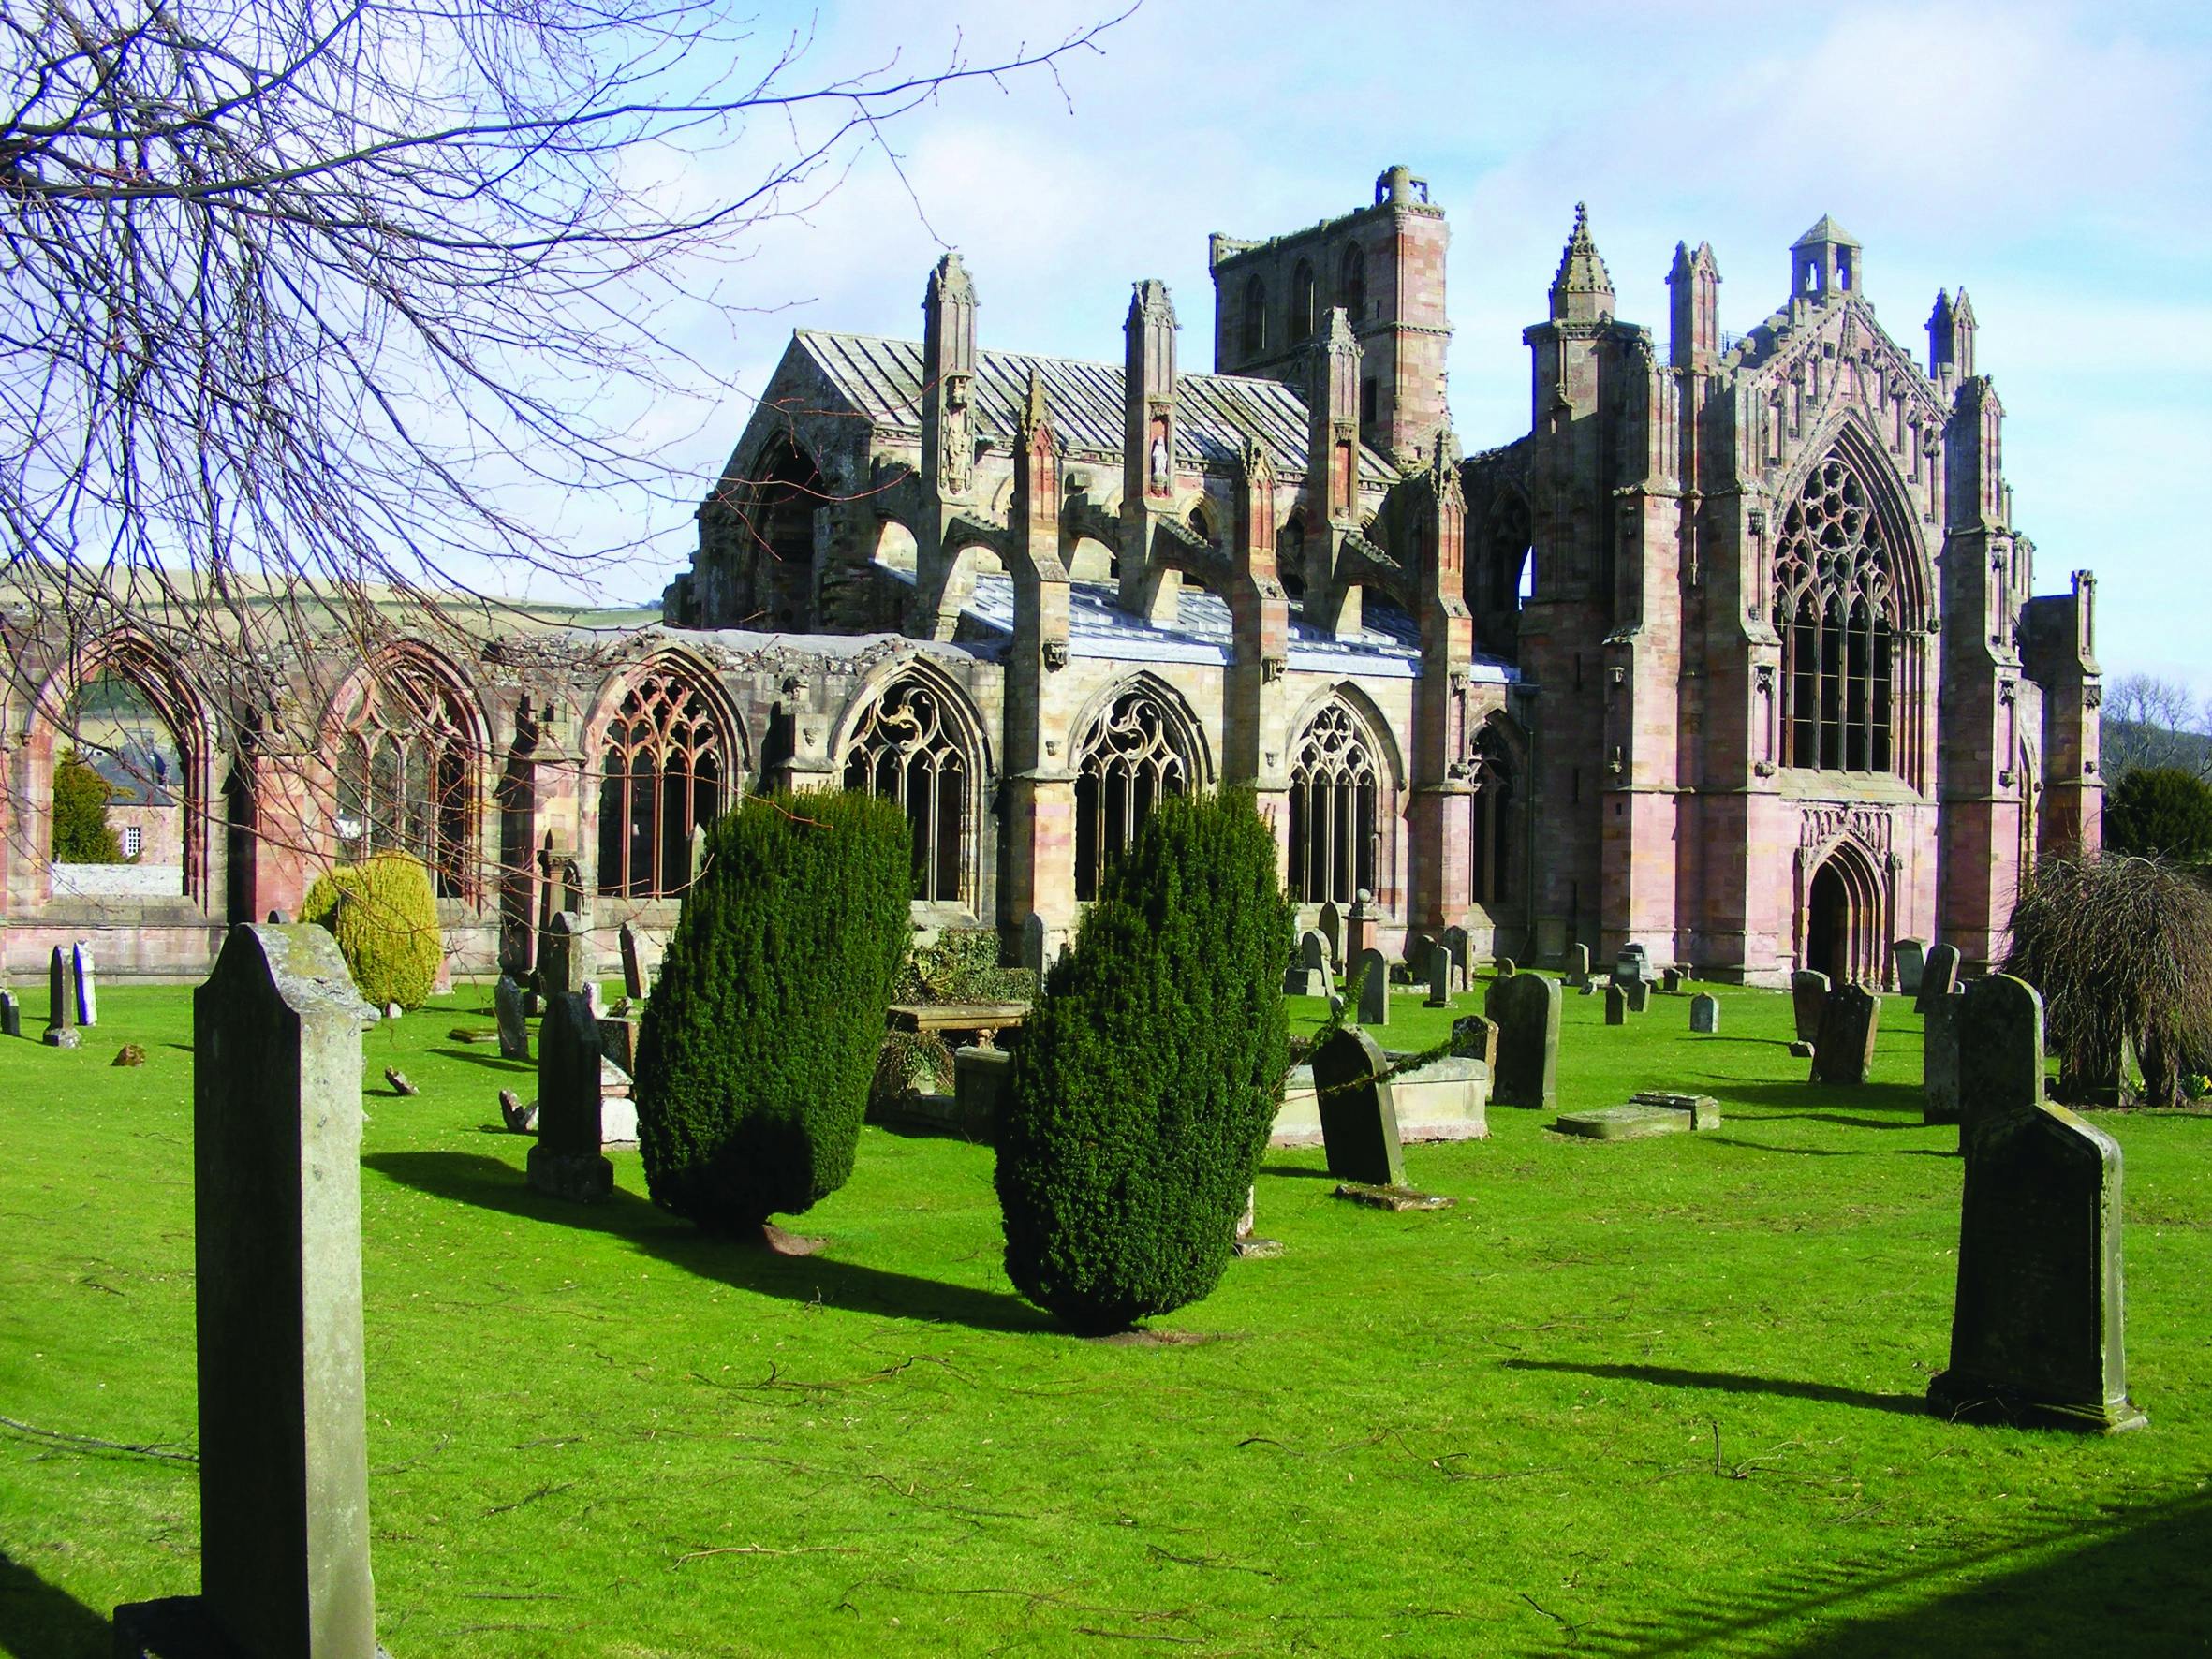 Rosslyn Chapel and Scottish Borders small-group day tour